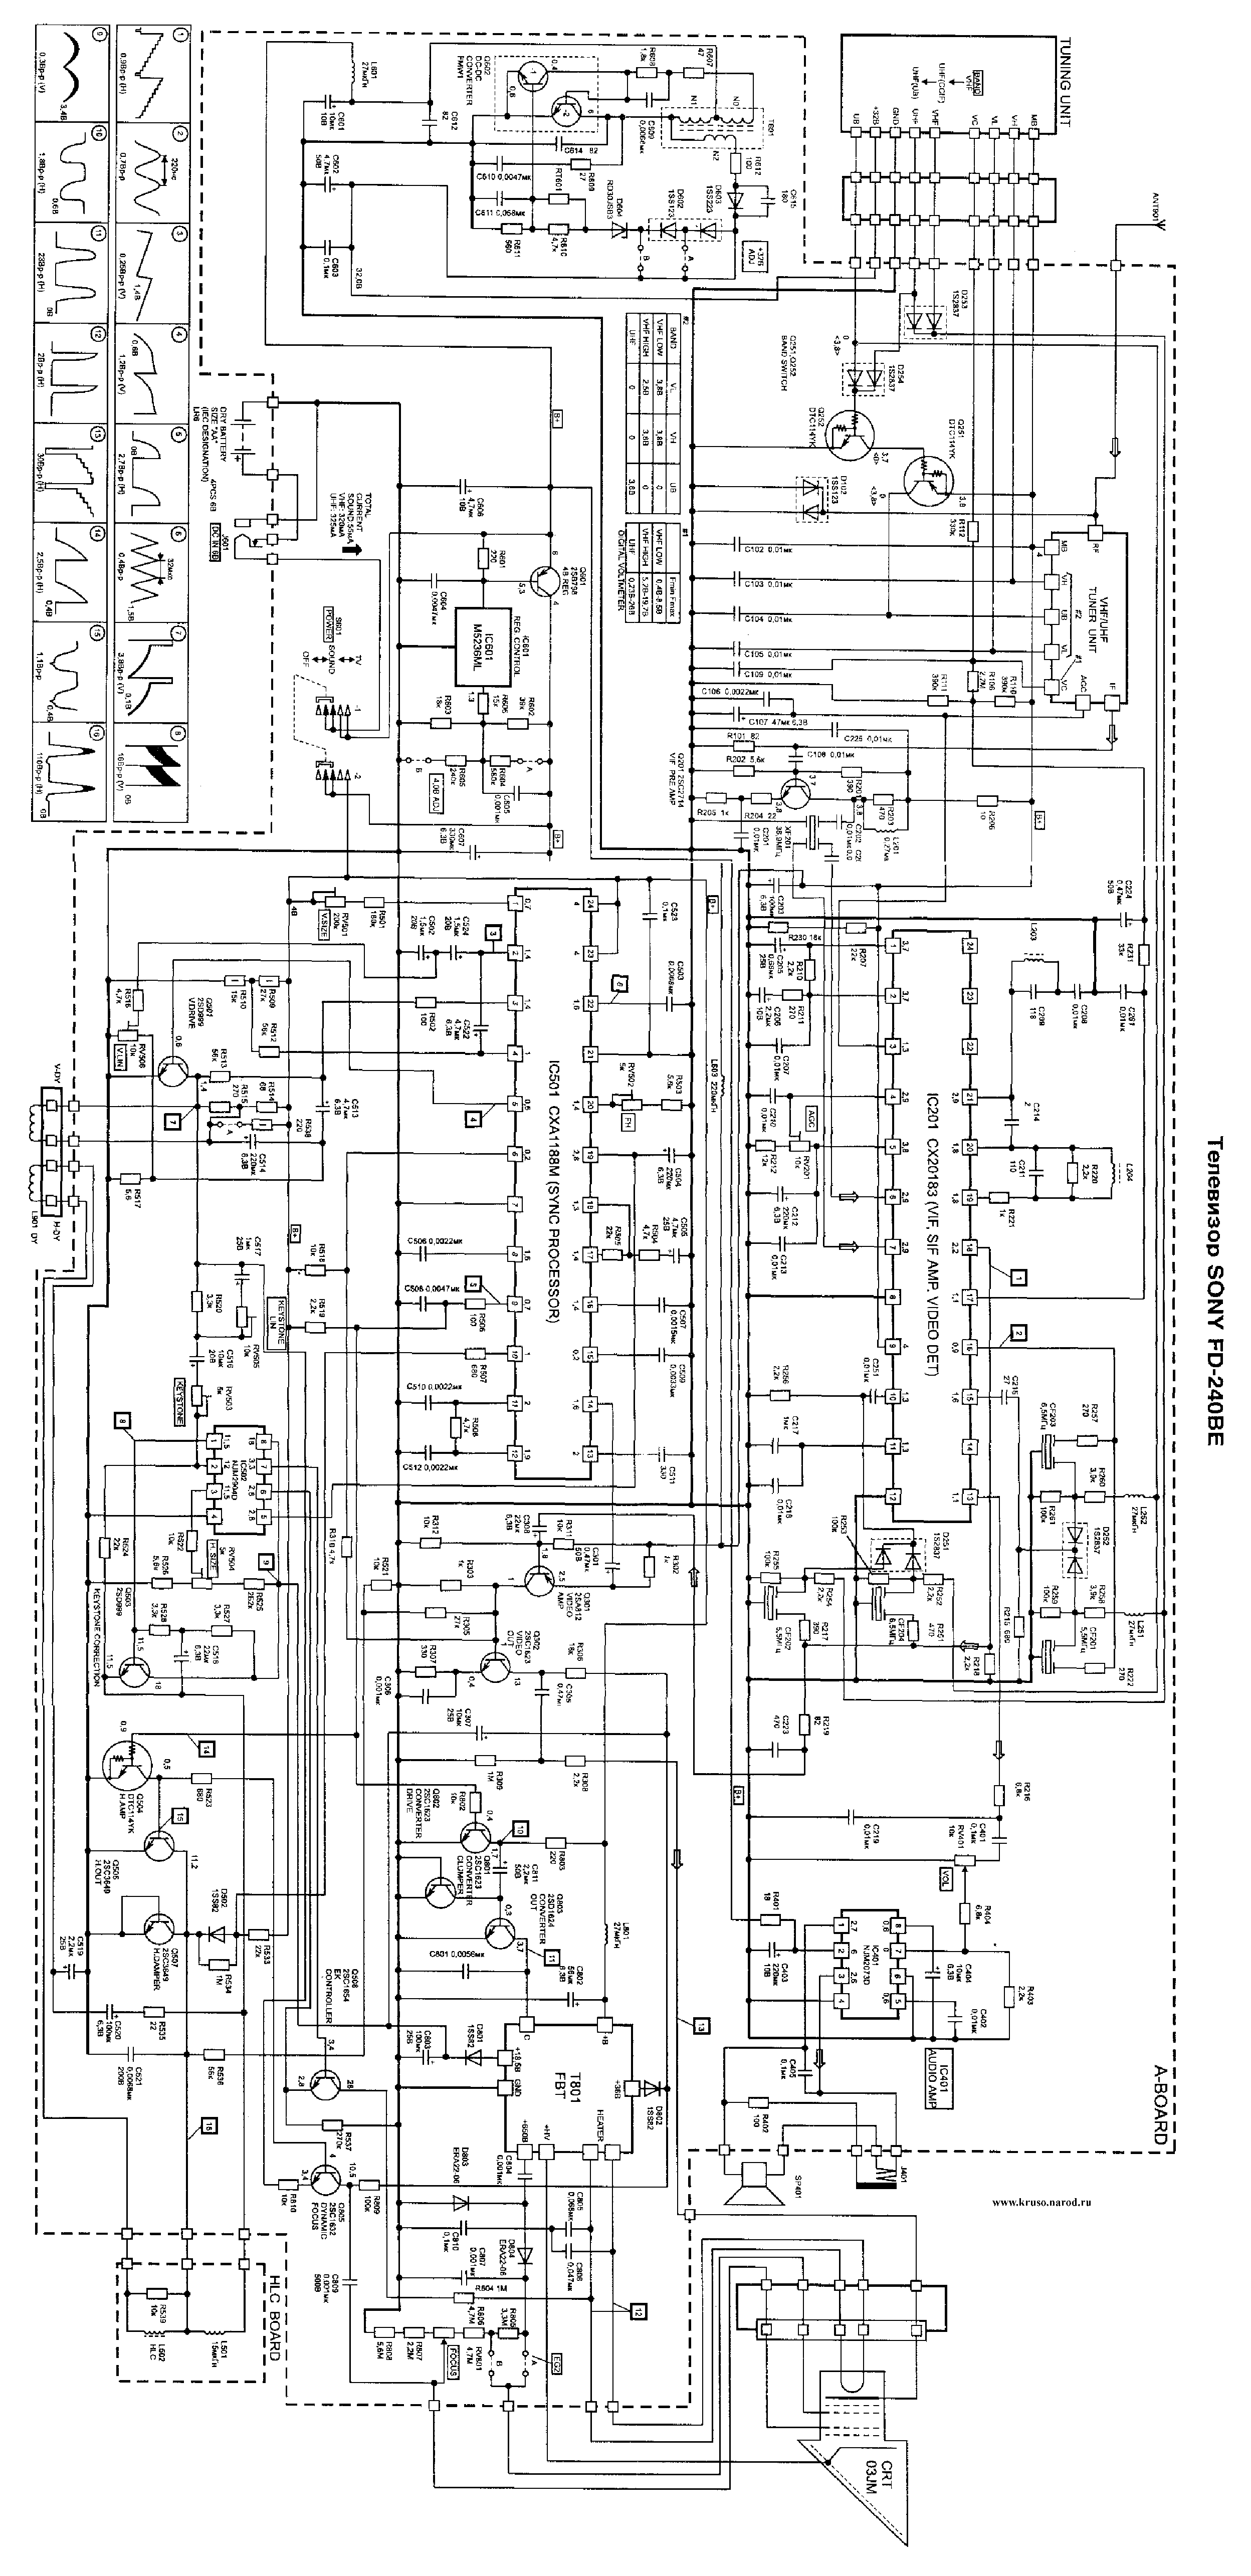 SONY FD-240BE service manual (1st page)